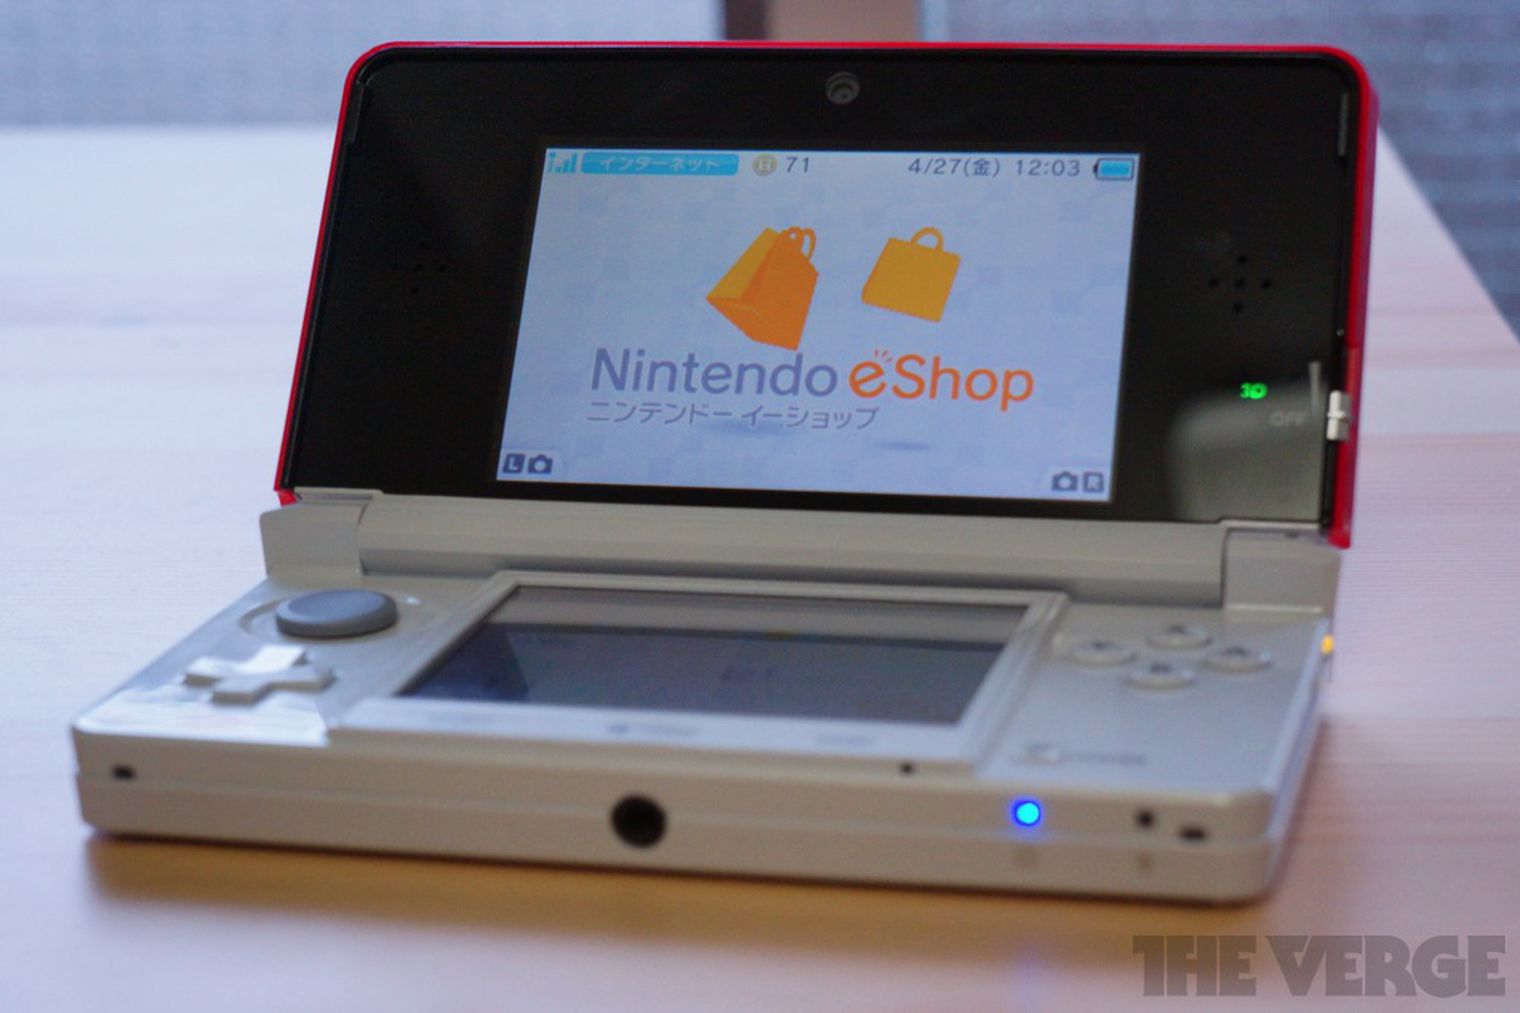 Nintendo Is Shutting Down The Wii U And 3DS eShop